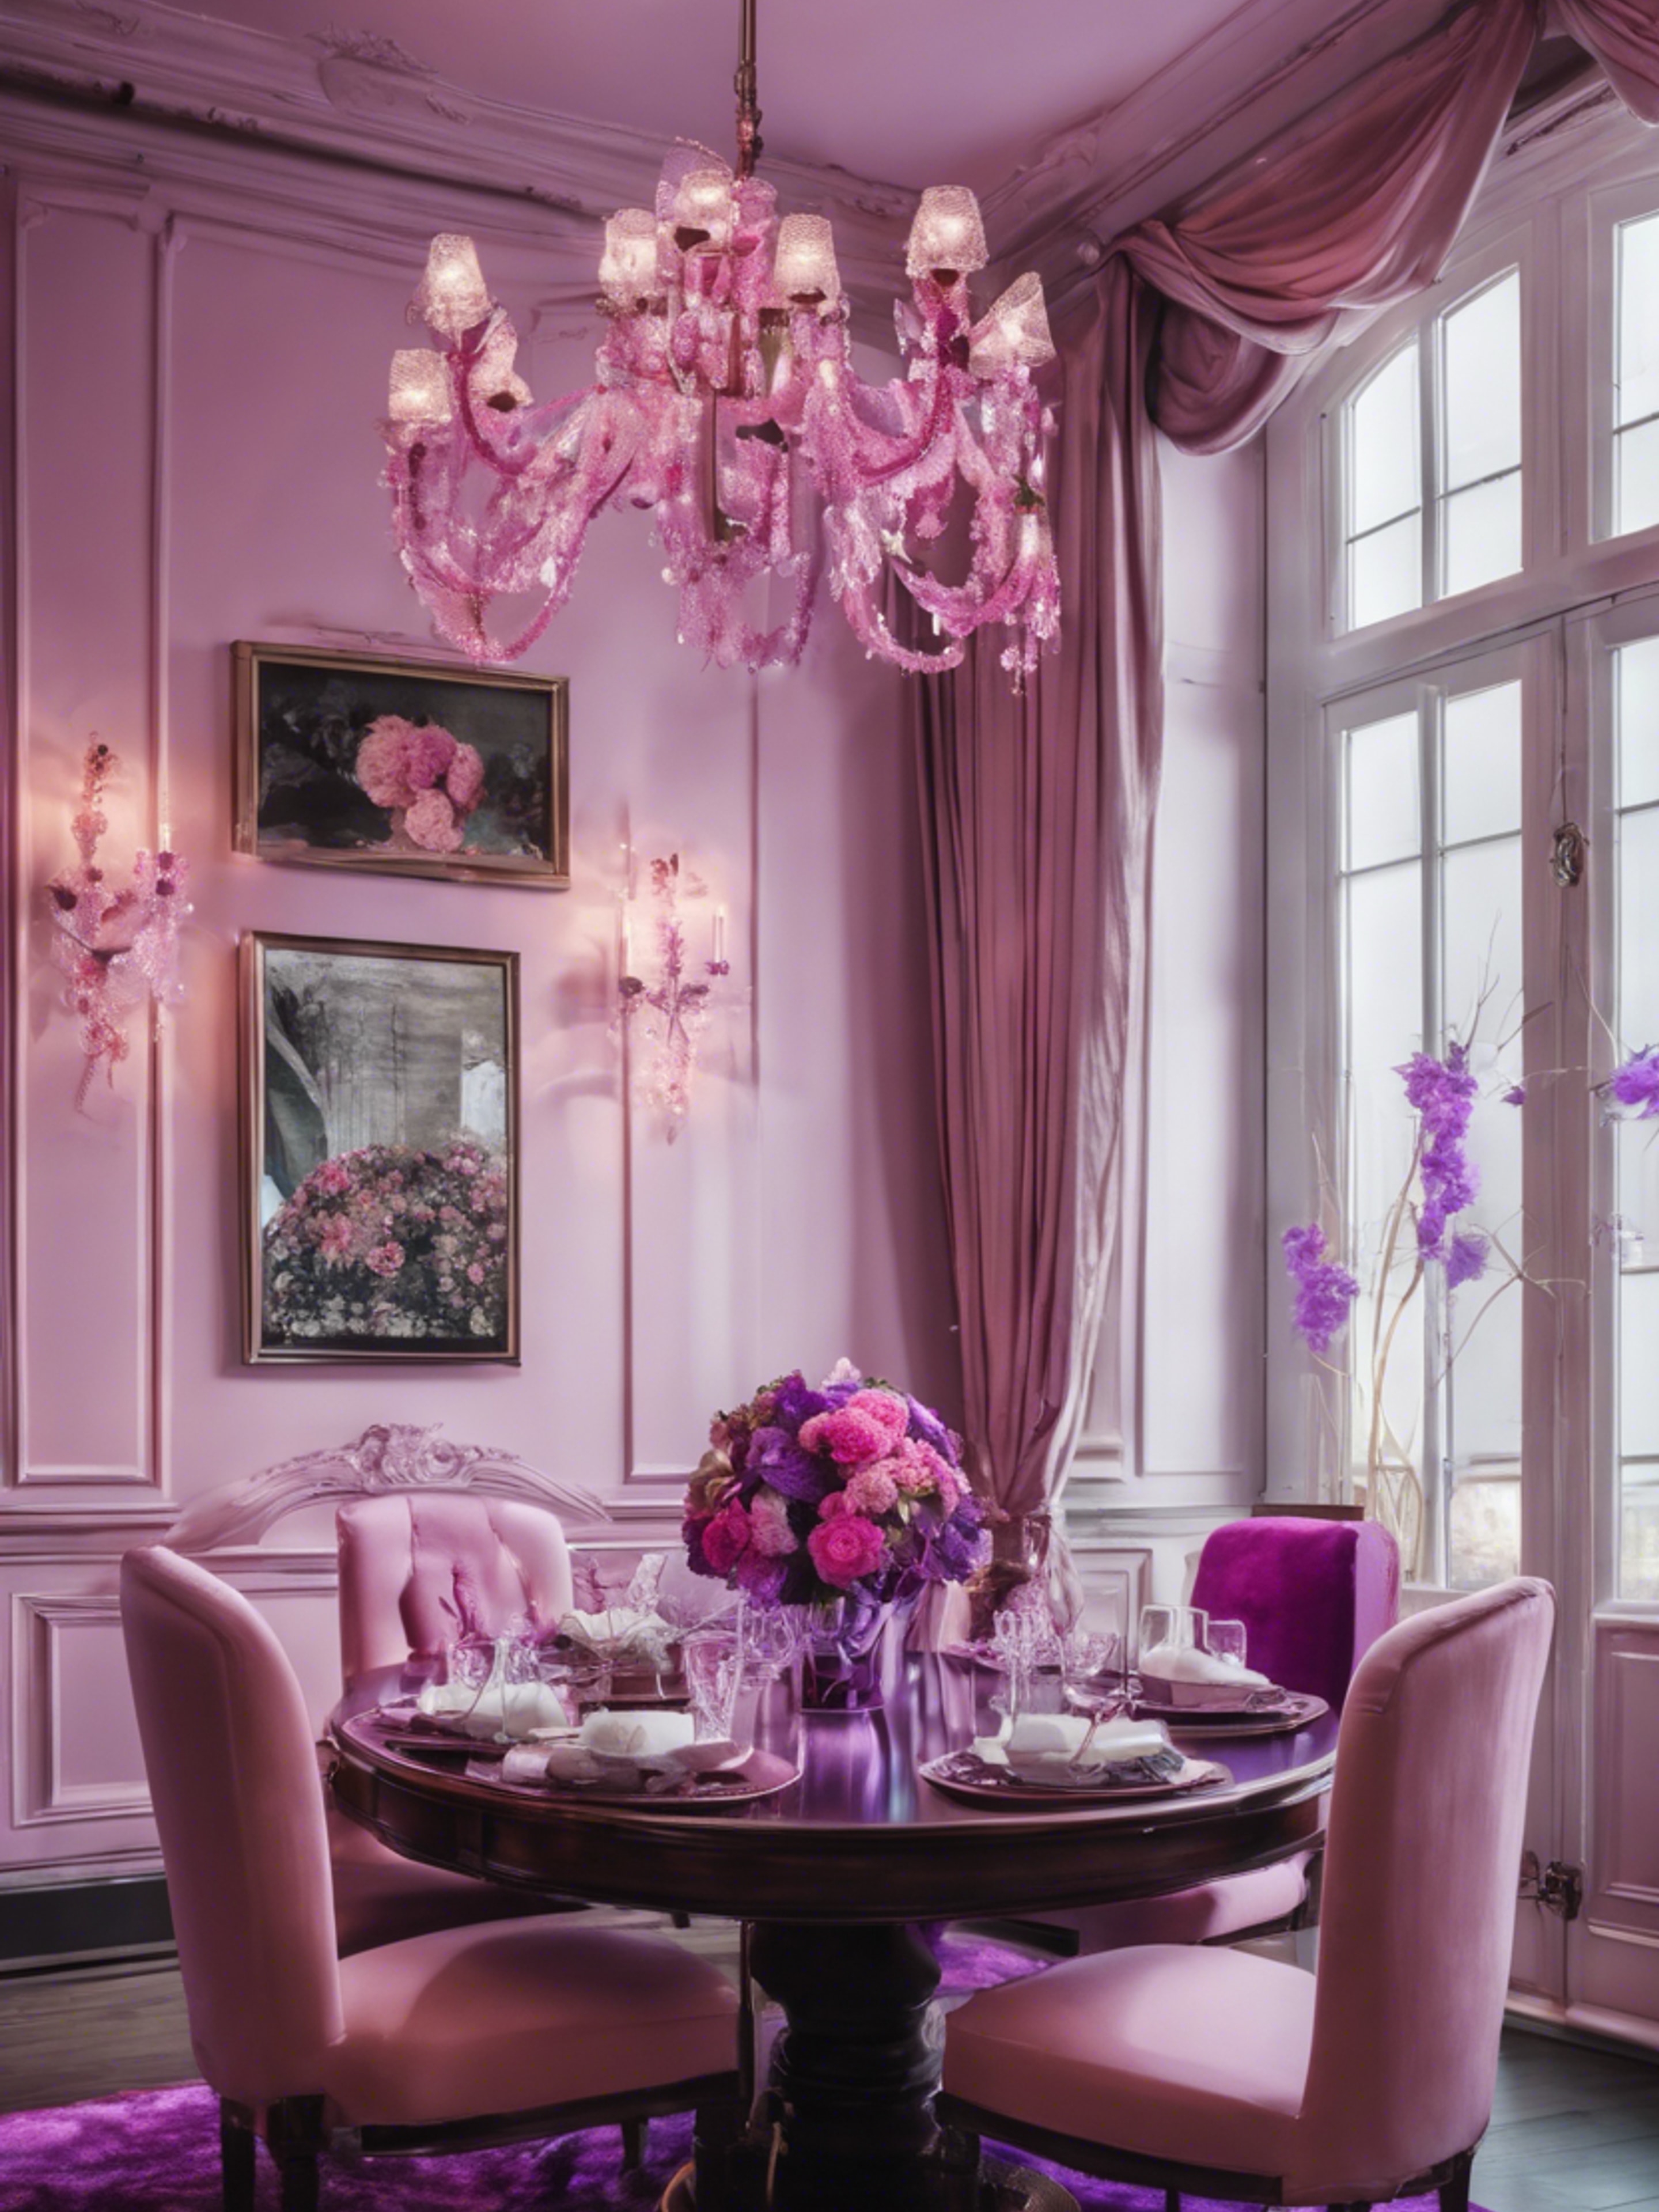 An elegant dining room with pink and purple embellishments. Wallpaper[83c898a8a8ab415cab42]